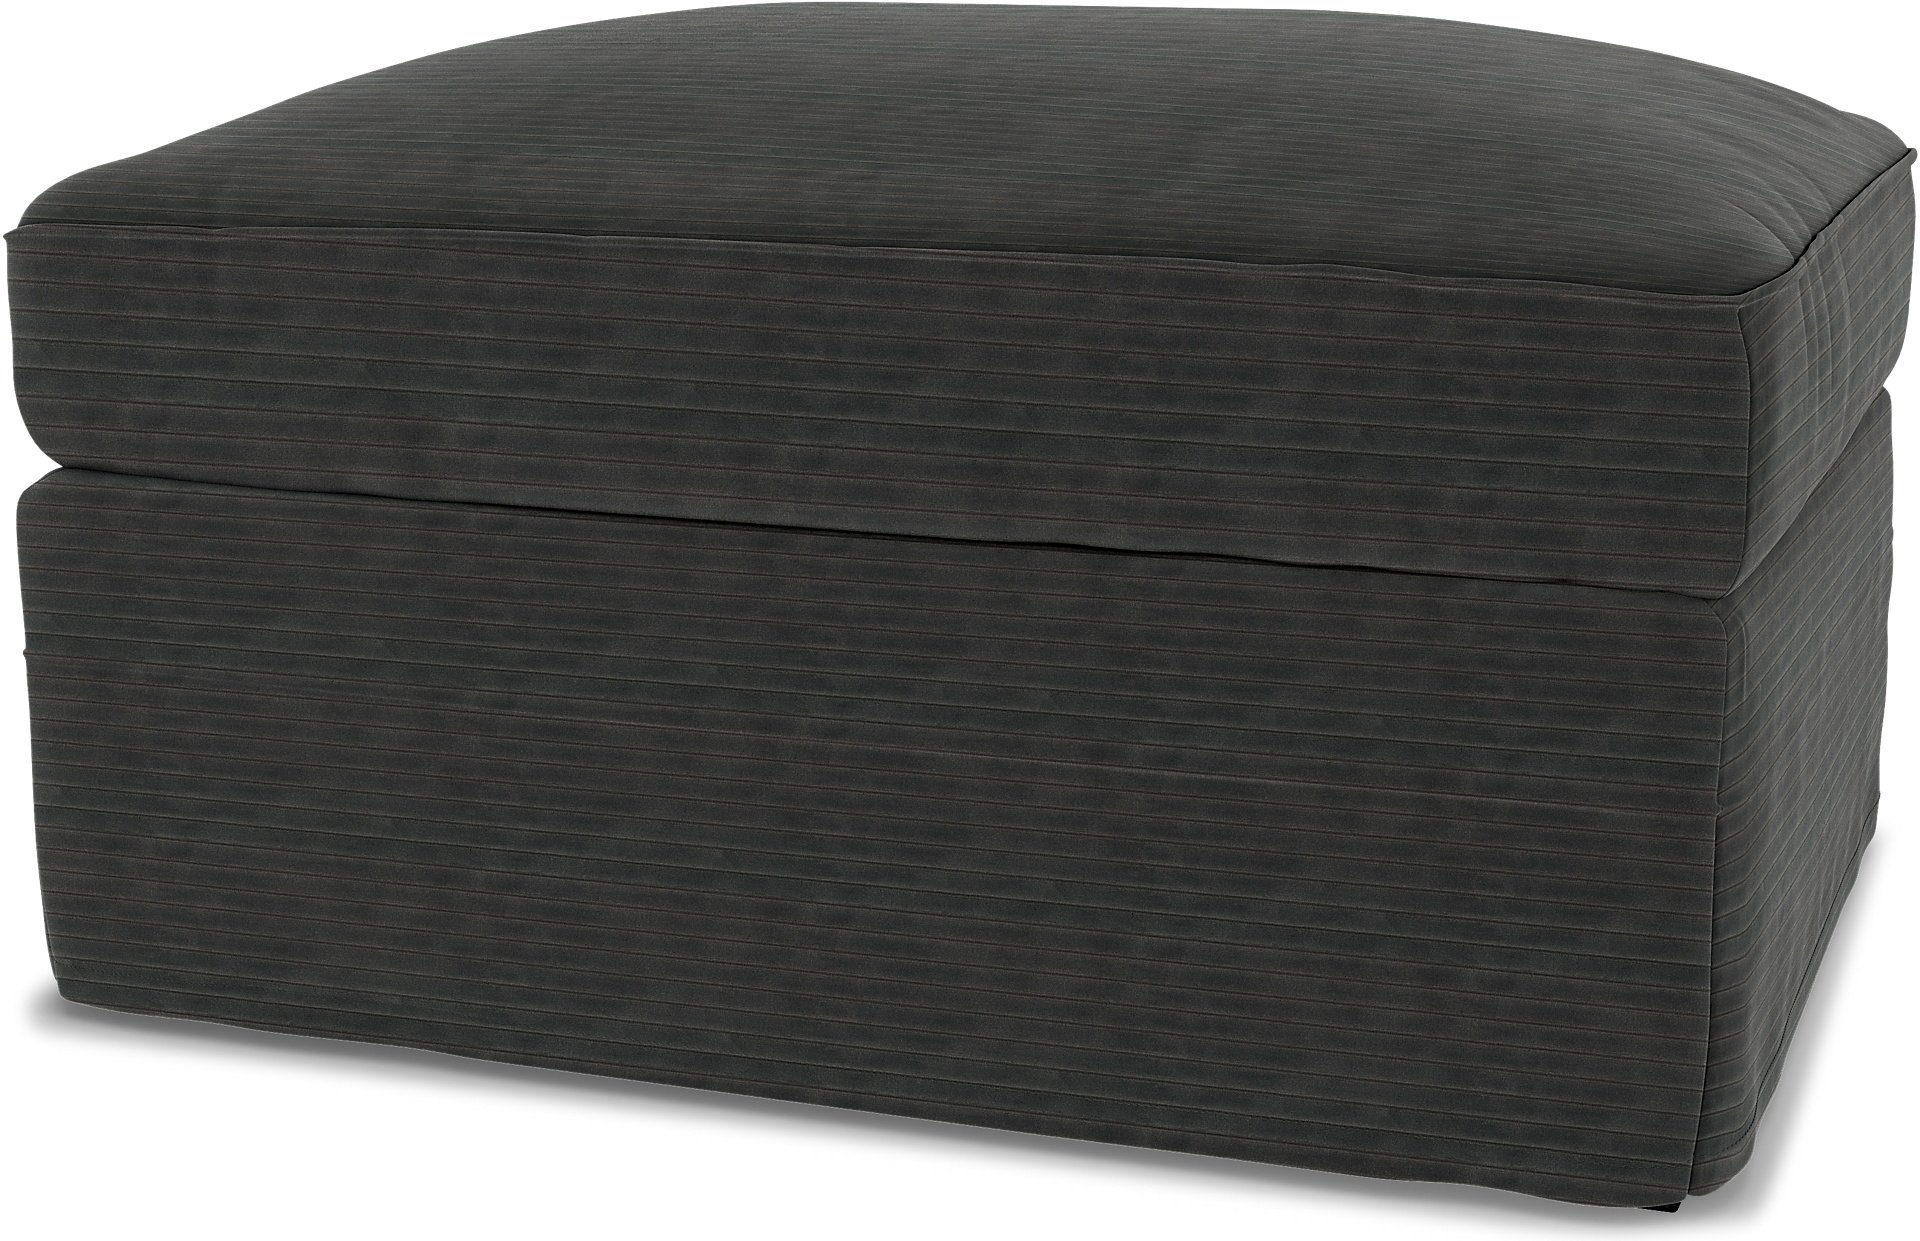 IKEA - Gronlid Footstool with Storage Cover, Licorice, Corduroy - Bemz